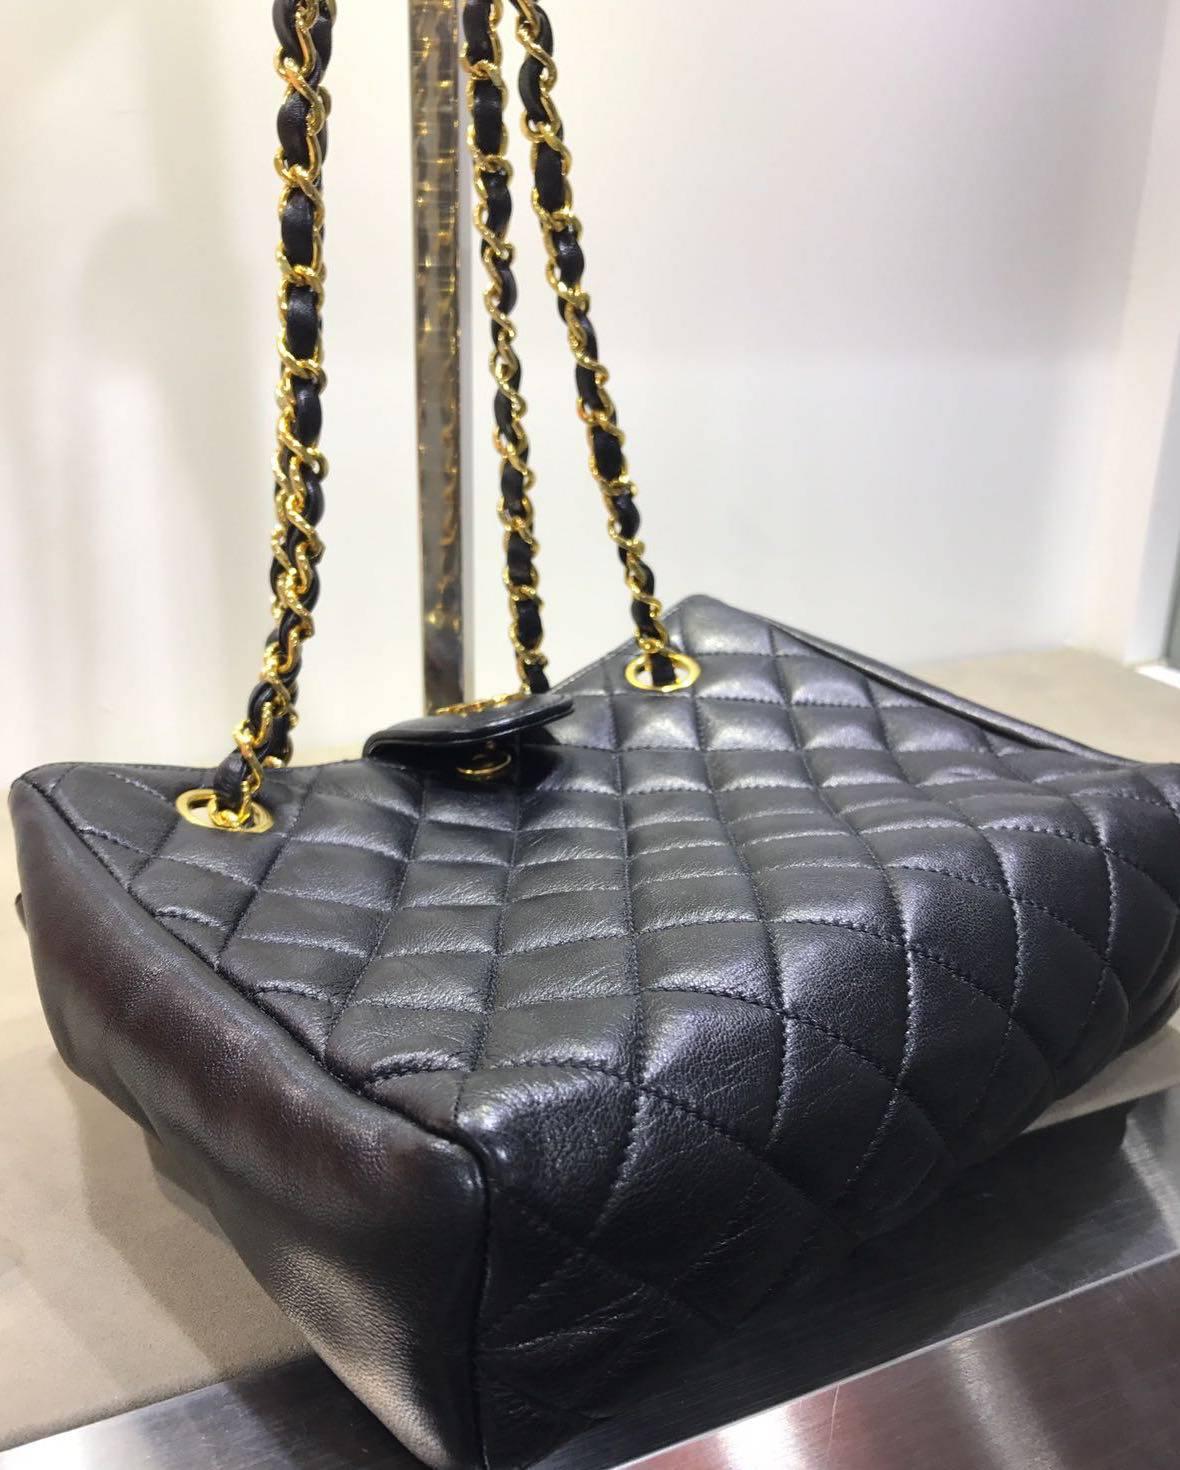 - Vintage 90s Chanel black quilted lambskin gold chain shoulder bag. 

- Featuring "CC" closing. Red leather interior with two zipper pockets. 

- It does not come with an authenticity card but we guarantee is 100% authentic. However, we